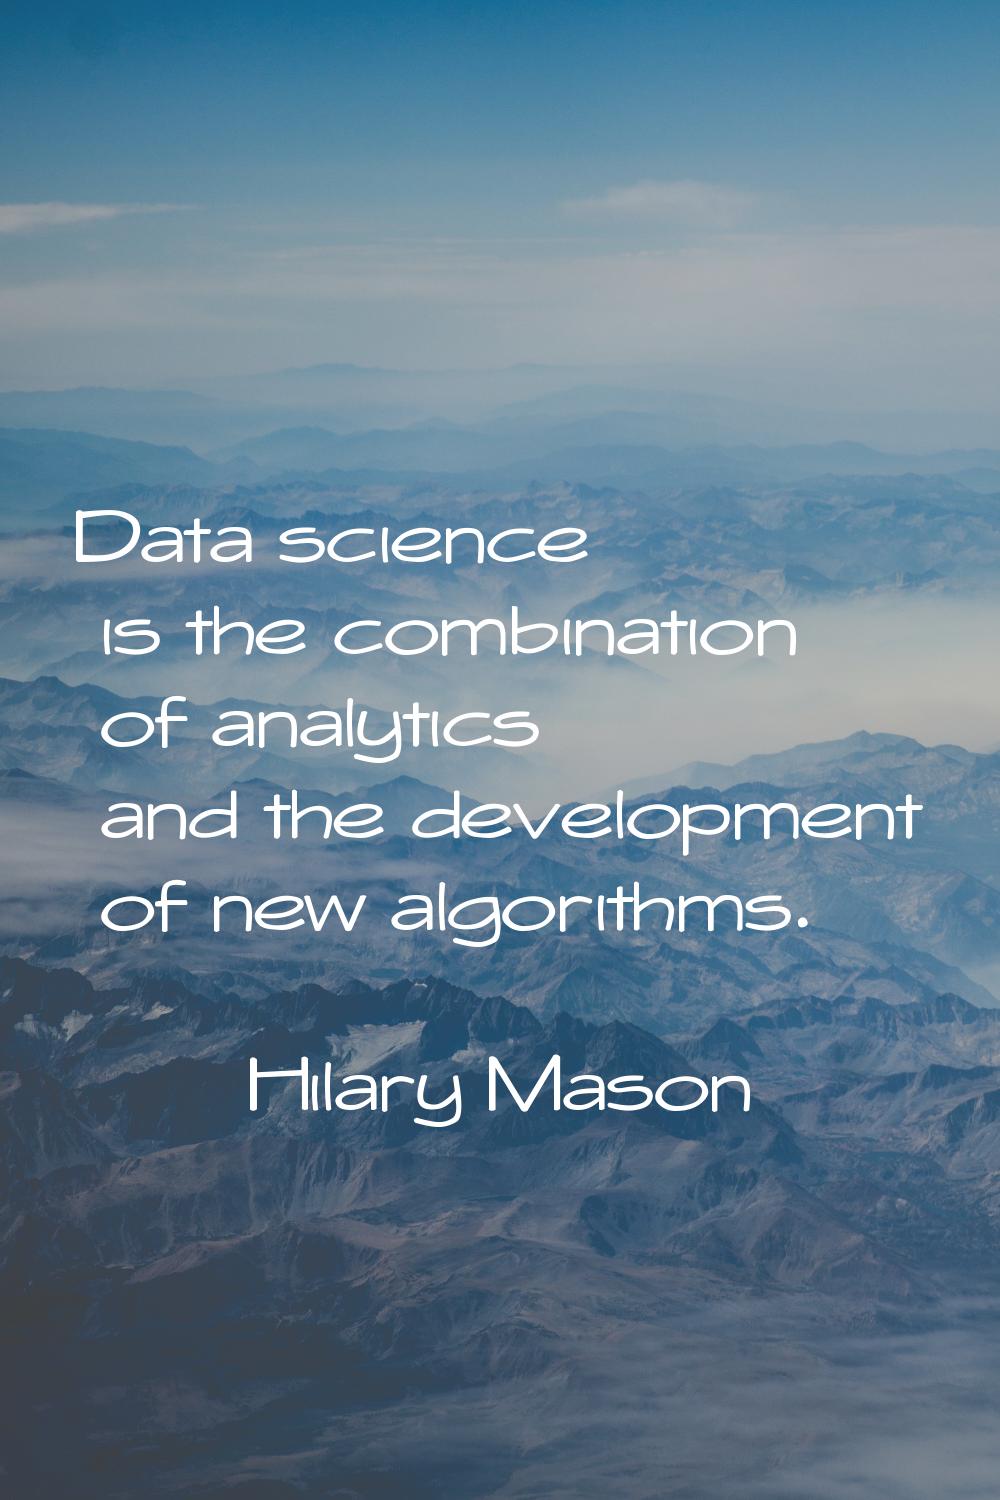 Data science is the combination of analytics and the development of new algorithms.